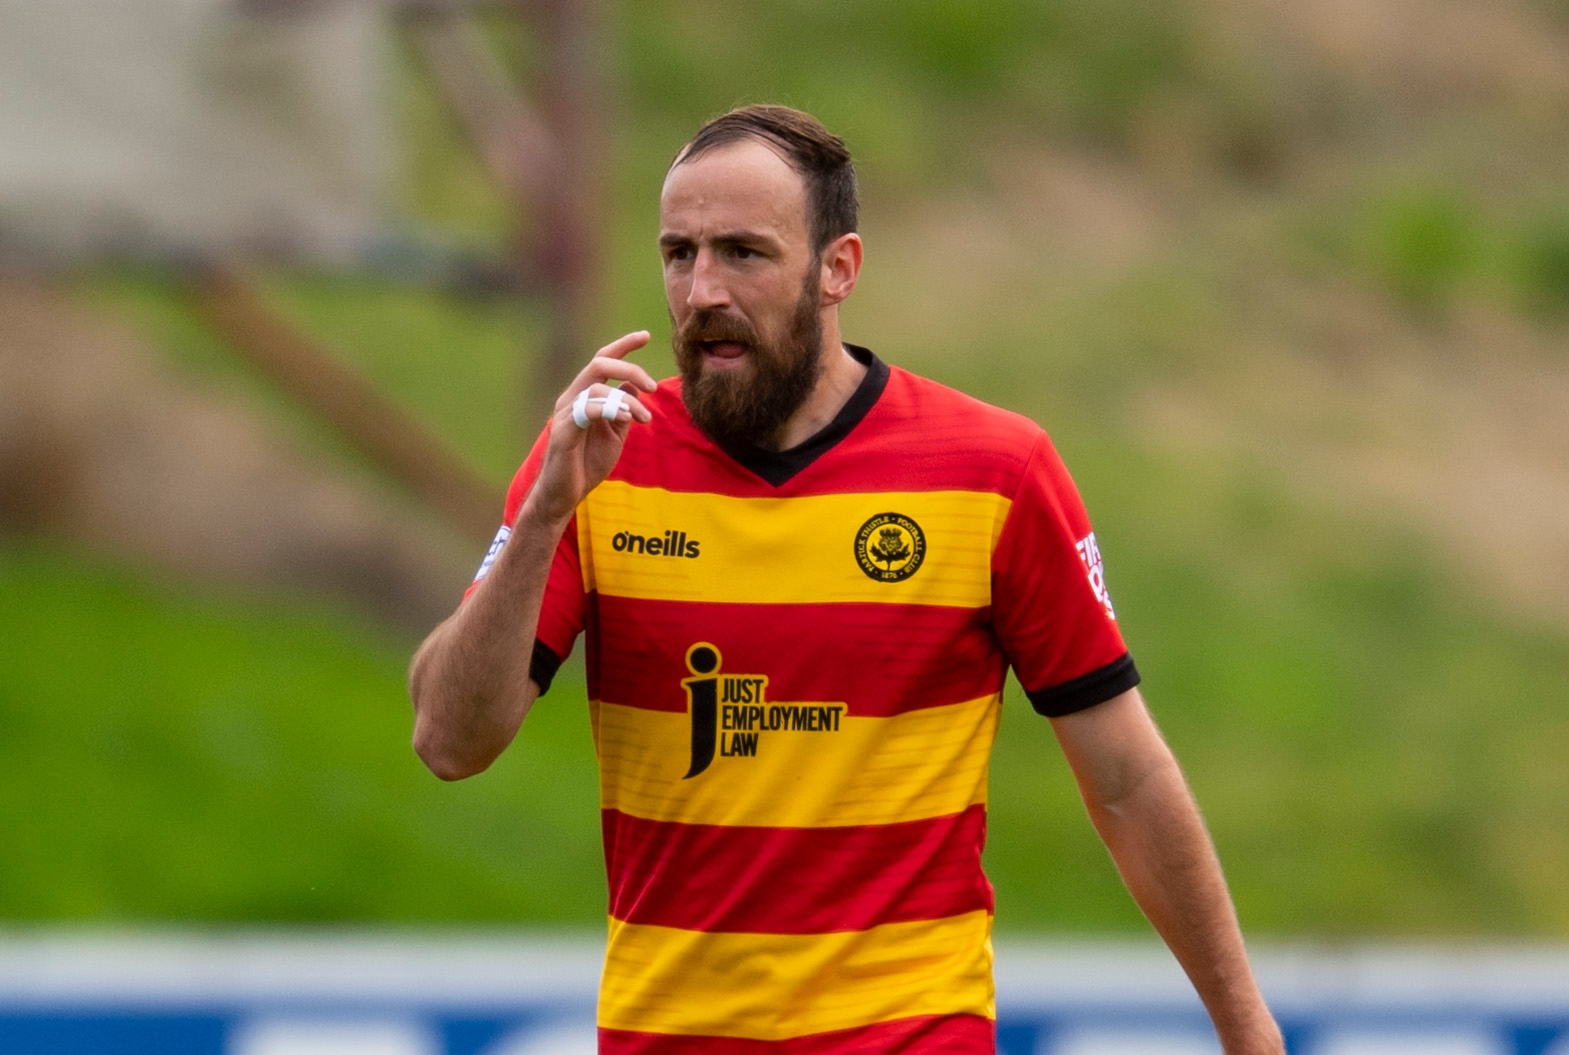 'I thought I was going to be the hero for once': Stuart Bannigan rues late Cove equaliser